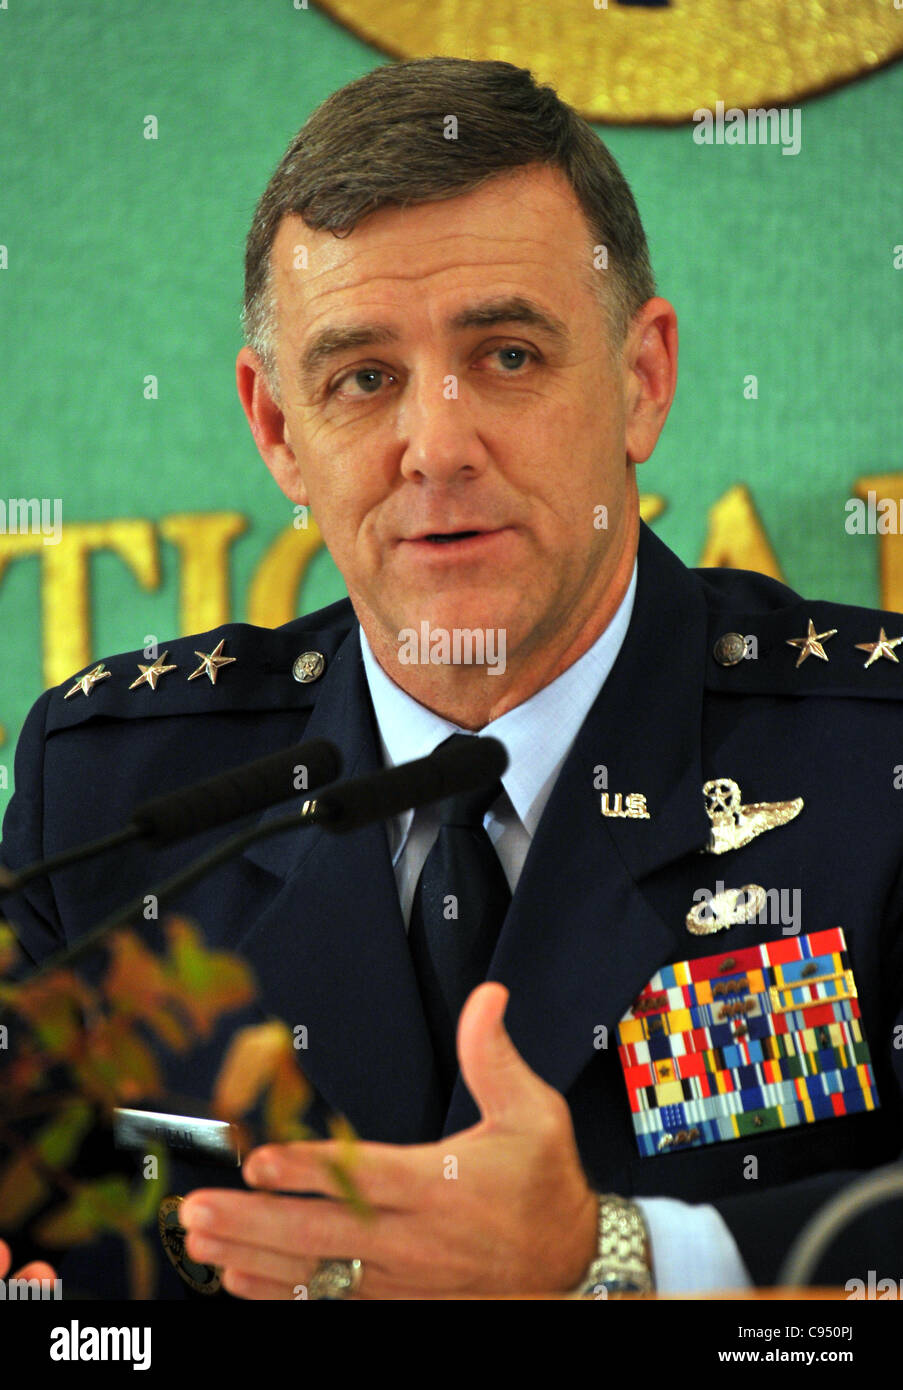 November 14, 2011, Tokyo, Japan - U.S. Air Force Lt. Gen. Burton M. Field, the commander of U.S. Forces Japan, speaks during a luncheon at Japan National Press Club in Tokyo on Monday, November 14, 2011. (Photo by Natsuki Sakai/AFLO) [3615] -mis- Stock Photo